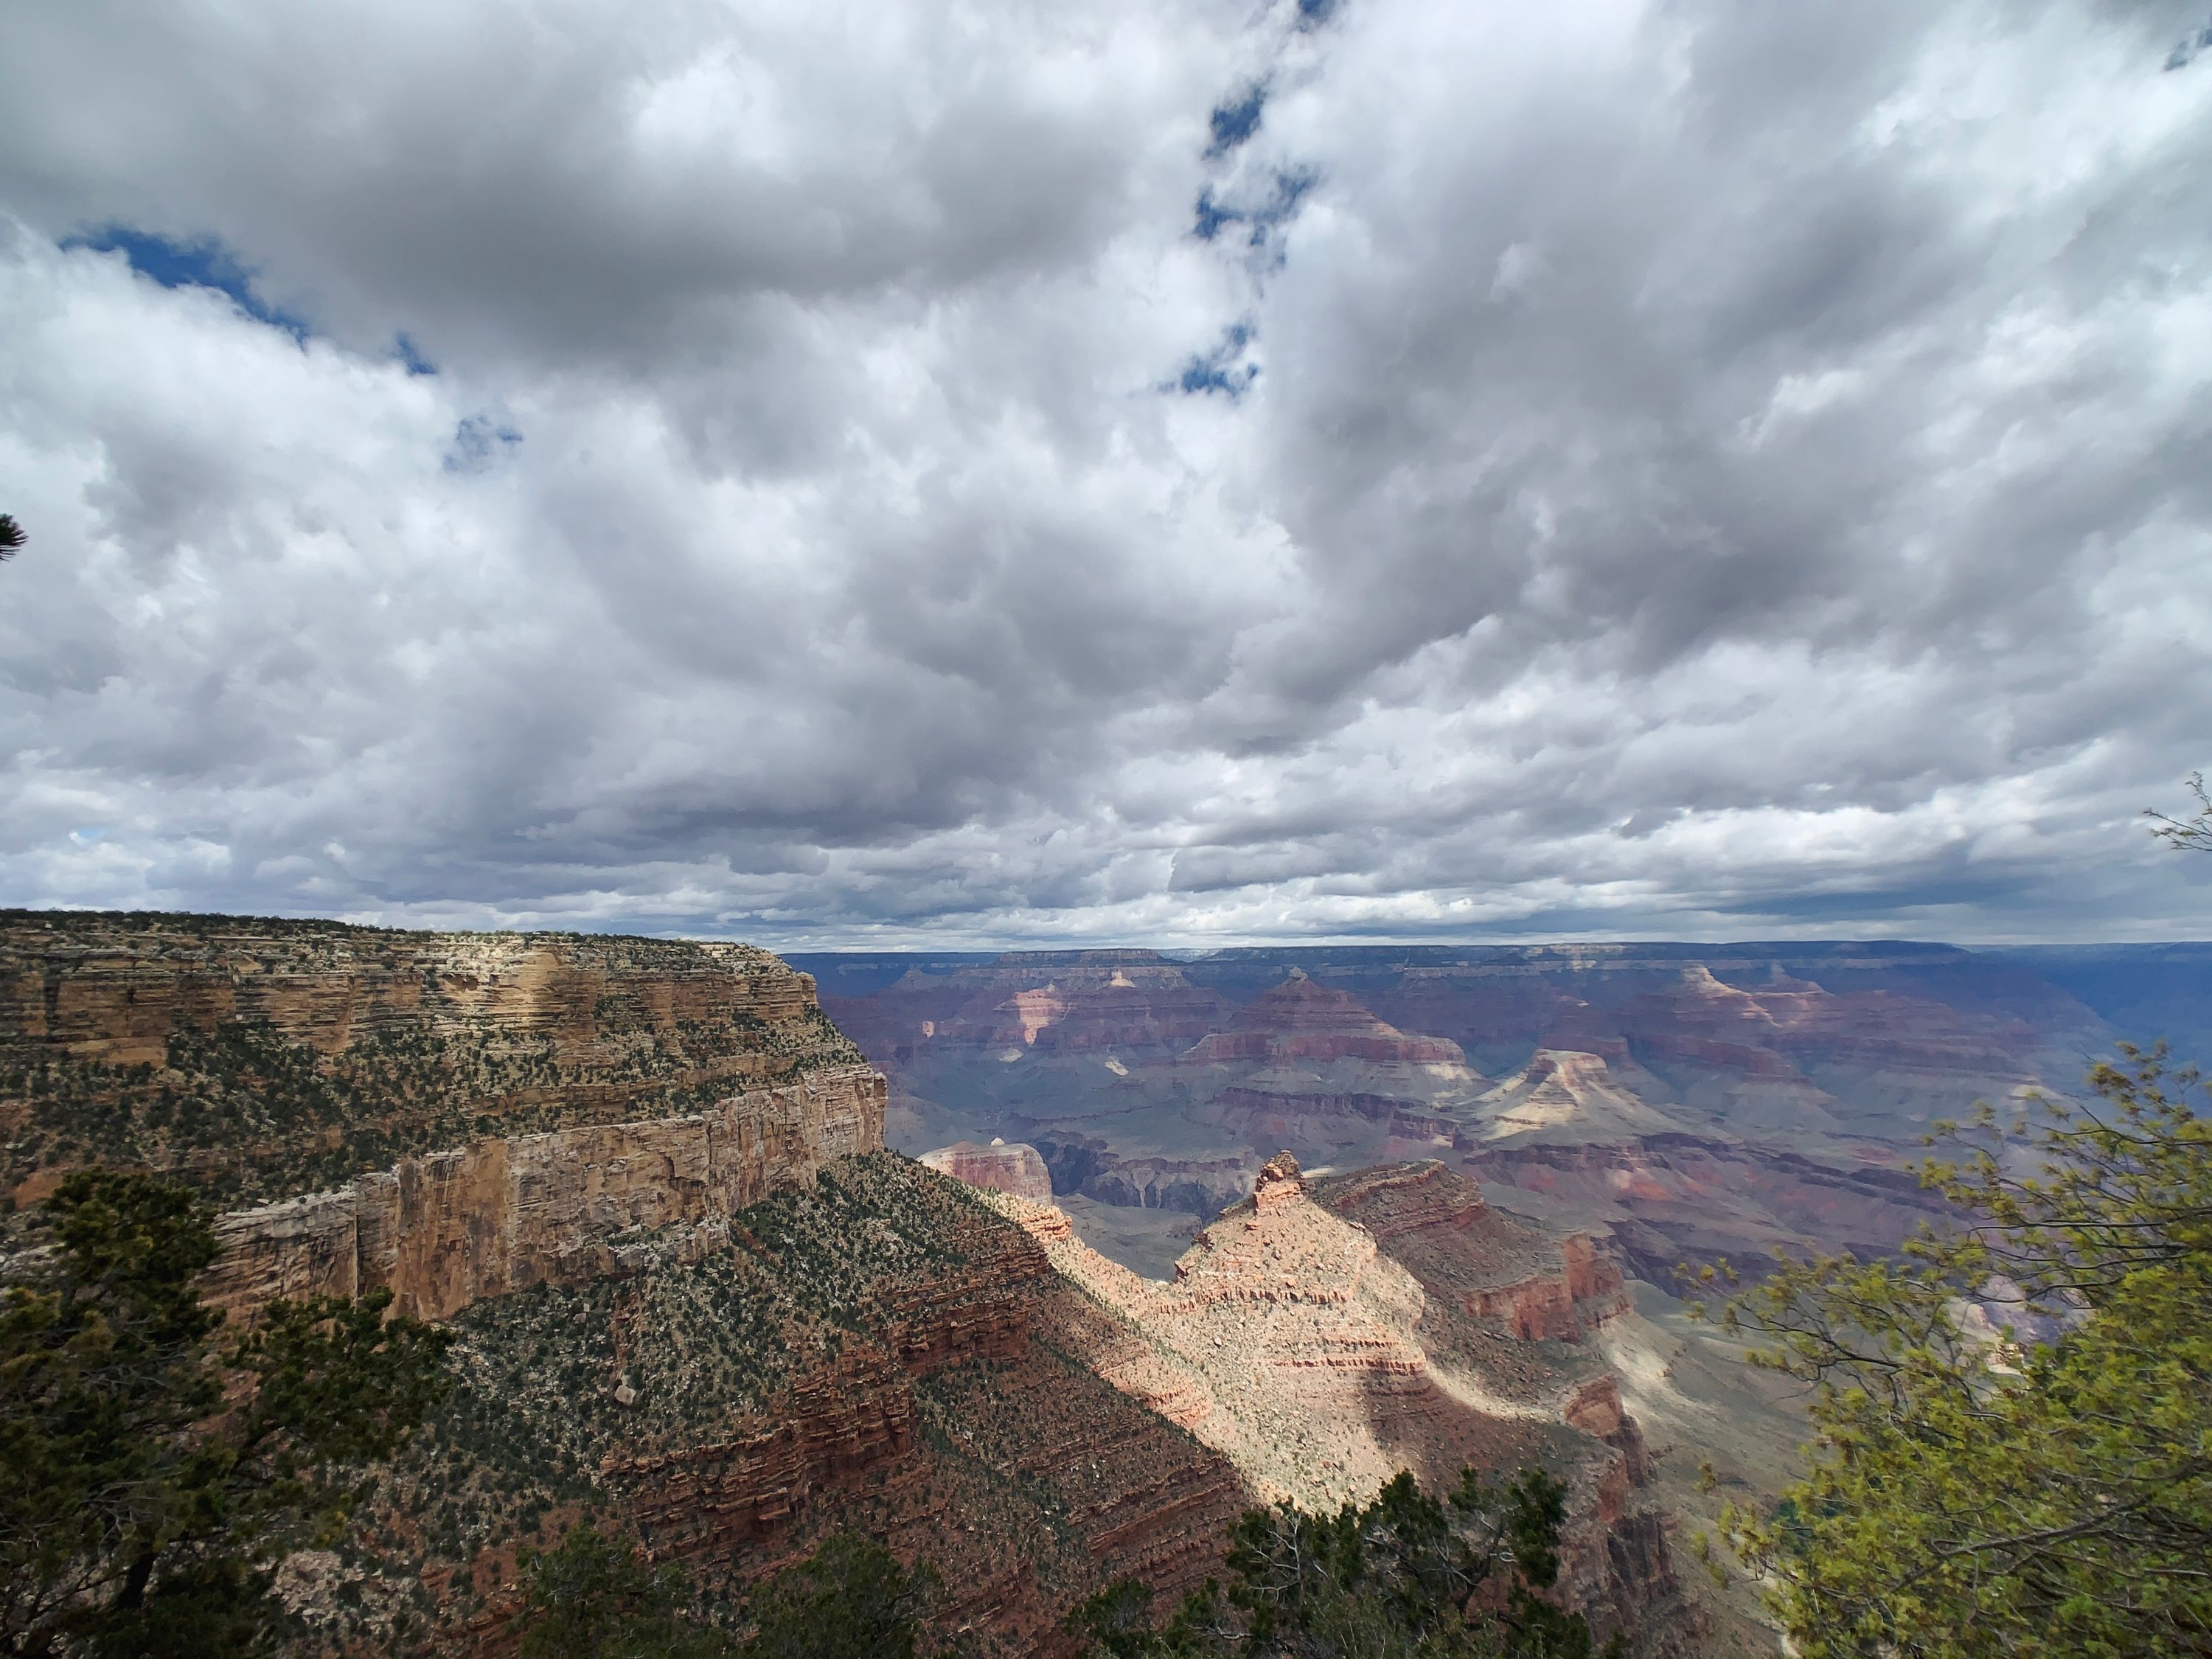 A View from the South Rim of the Grand Canyon